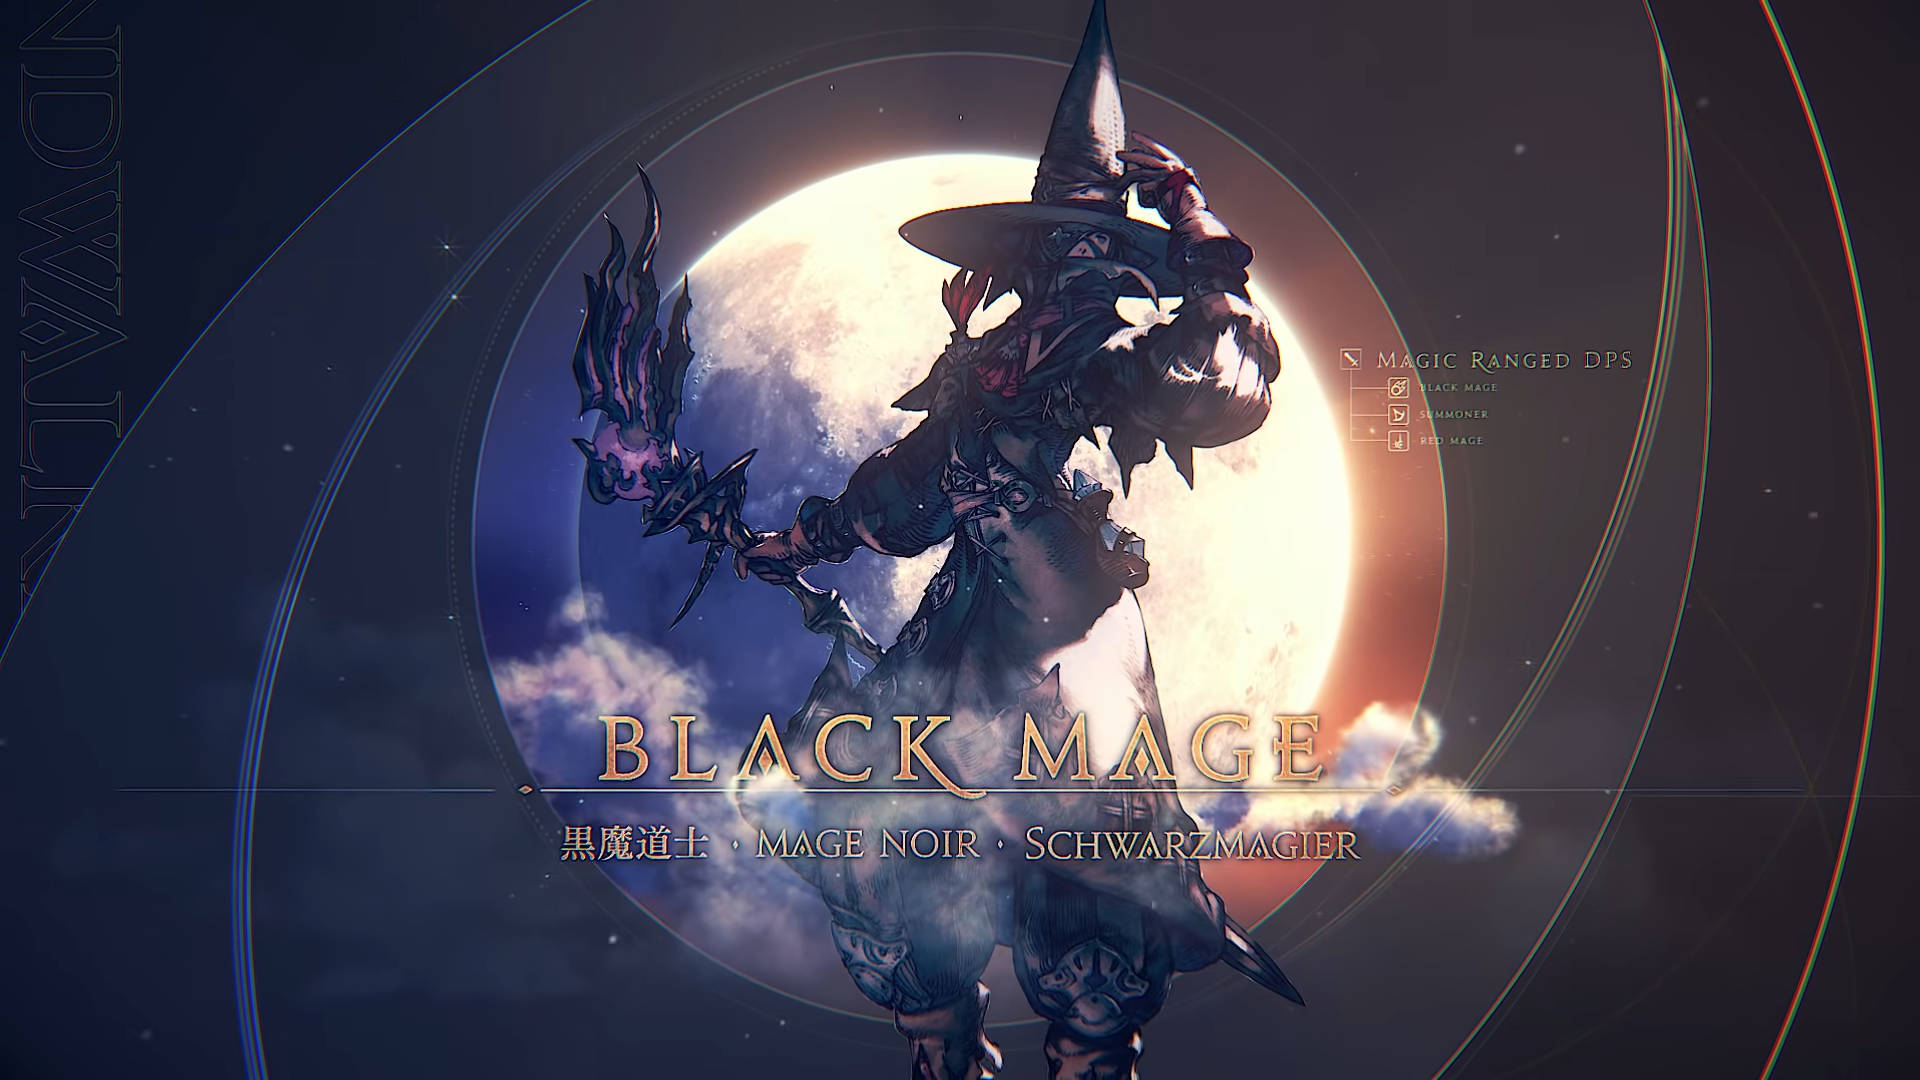 FFXIV’s Black Mage was made too strong in PvP and will be rebalanced after player backlash